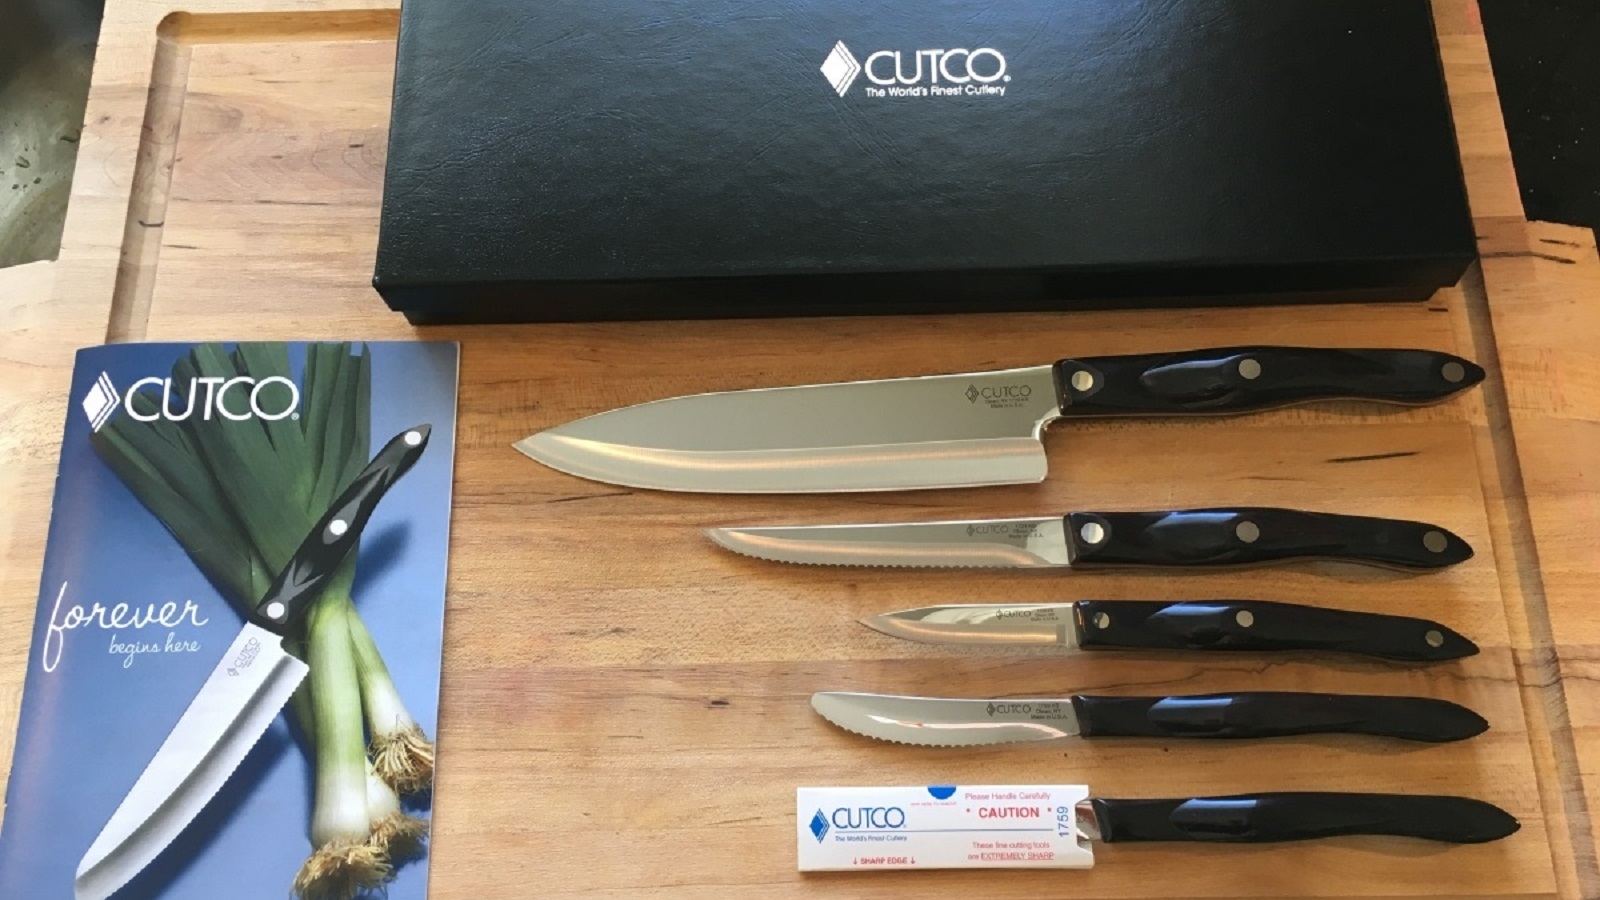 Cutco Knife Review: Experience the Excellence of American-Made Kitchen Cutlery